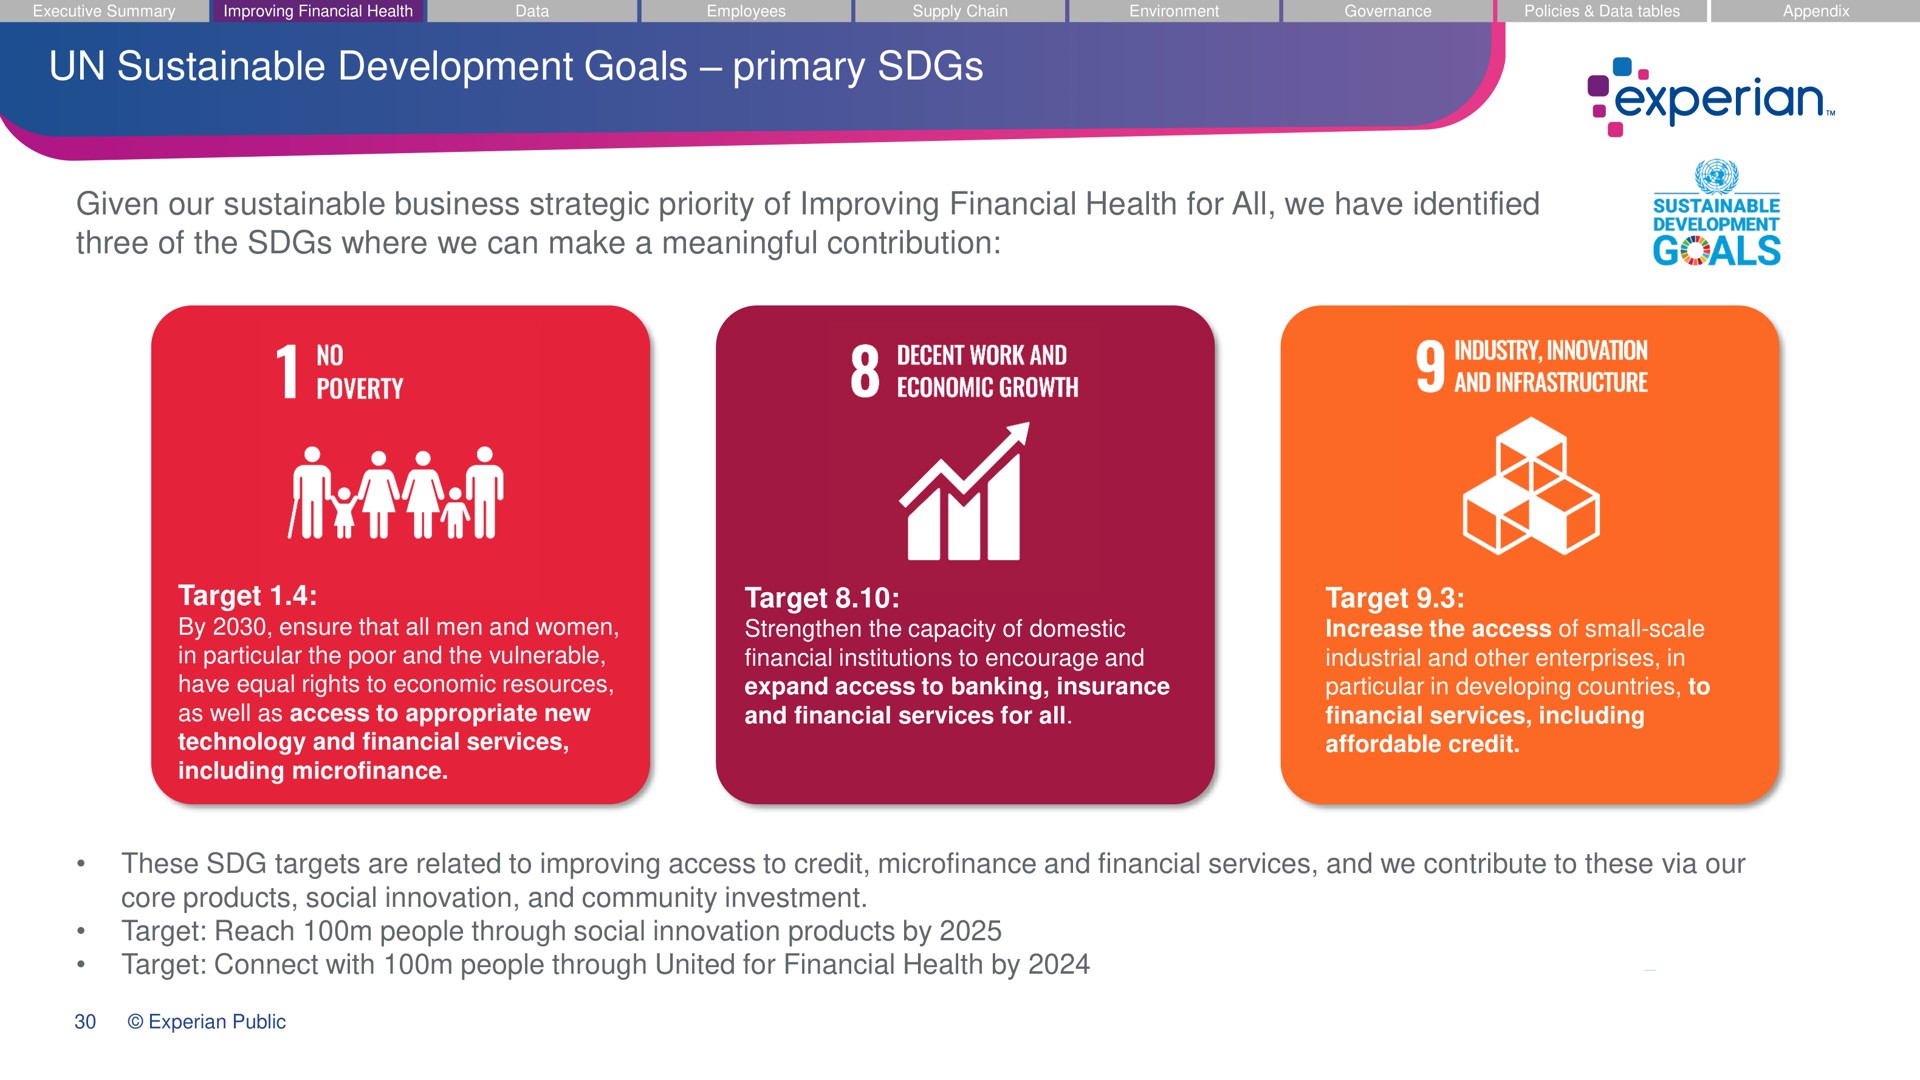 sustainable development goals primary given our sustainable business strategic priority of improving financial health for all we have identified three of the where we can make a meaningful contribution target by ensure that all men and women in particular the poor and the vulnerable have equal rights to economic resources as well as access to appropriate new technology and financial services including target strengthen the capacity of domestic financial institutions to encourage and expand access to banking insurance and financial services for all target increase the access of small scale industrial and other enterprises in particular in developing countries to financial services including affordable credit these targets are related to improving access to credit and financial services and we contribute to these via our core products social innovation and community investment target reach people through social innovation products by target connect with people through united for financial health by nee feed | Experian